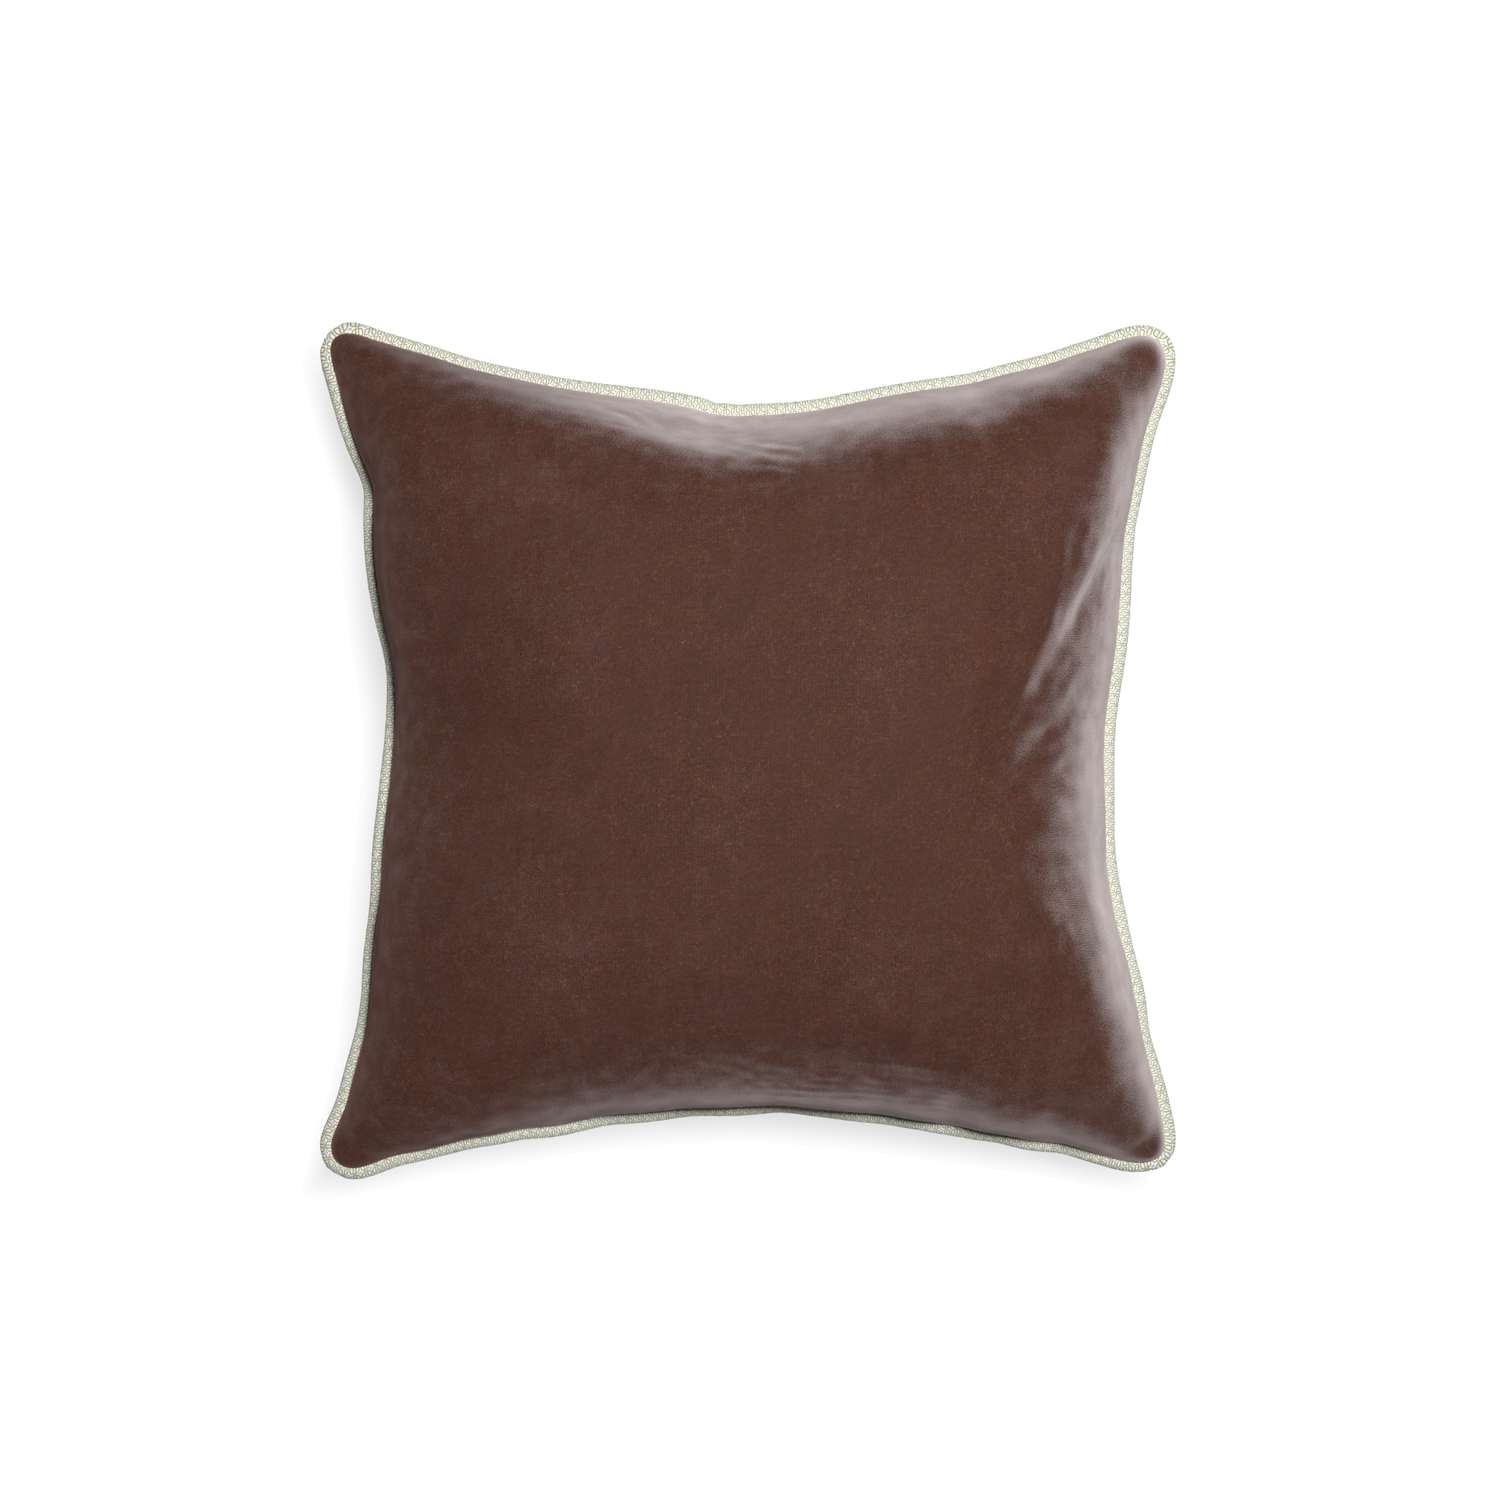 18-square walnut velvet custom pillow with l piping on white background